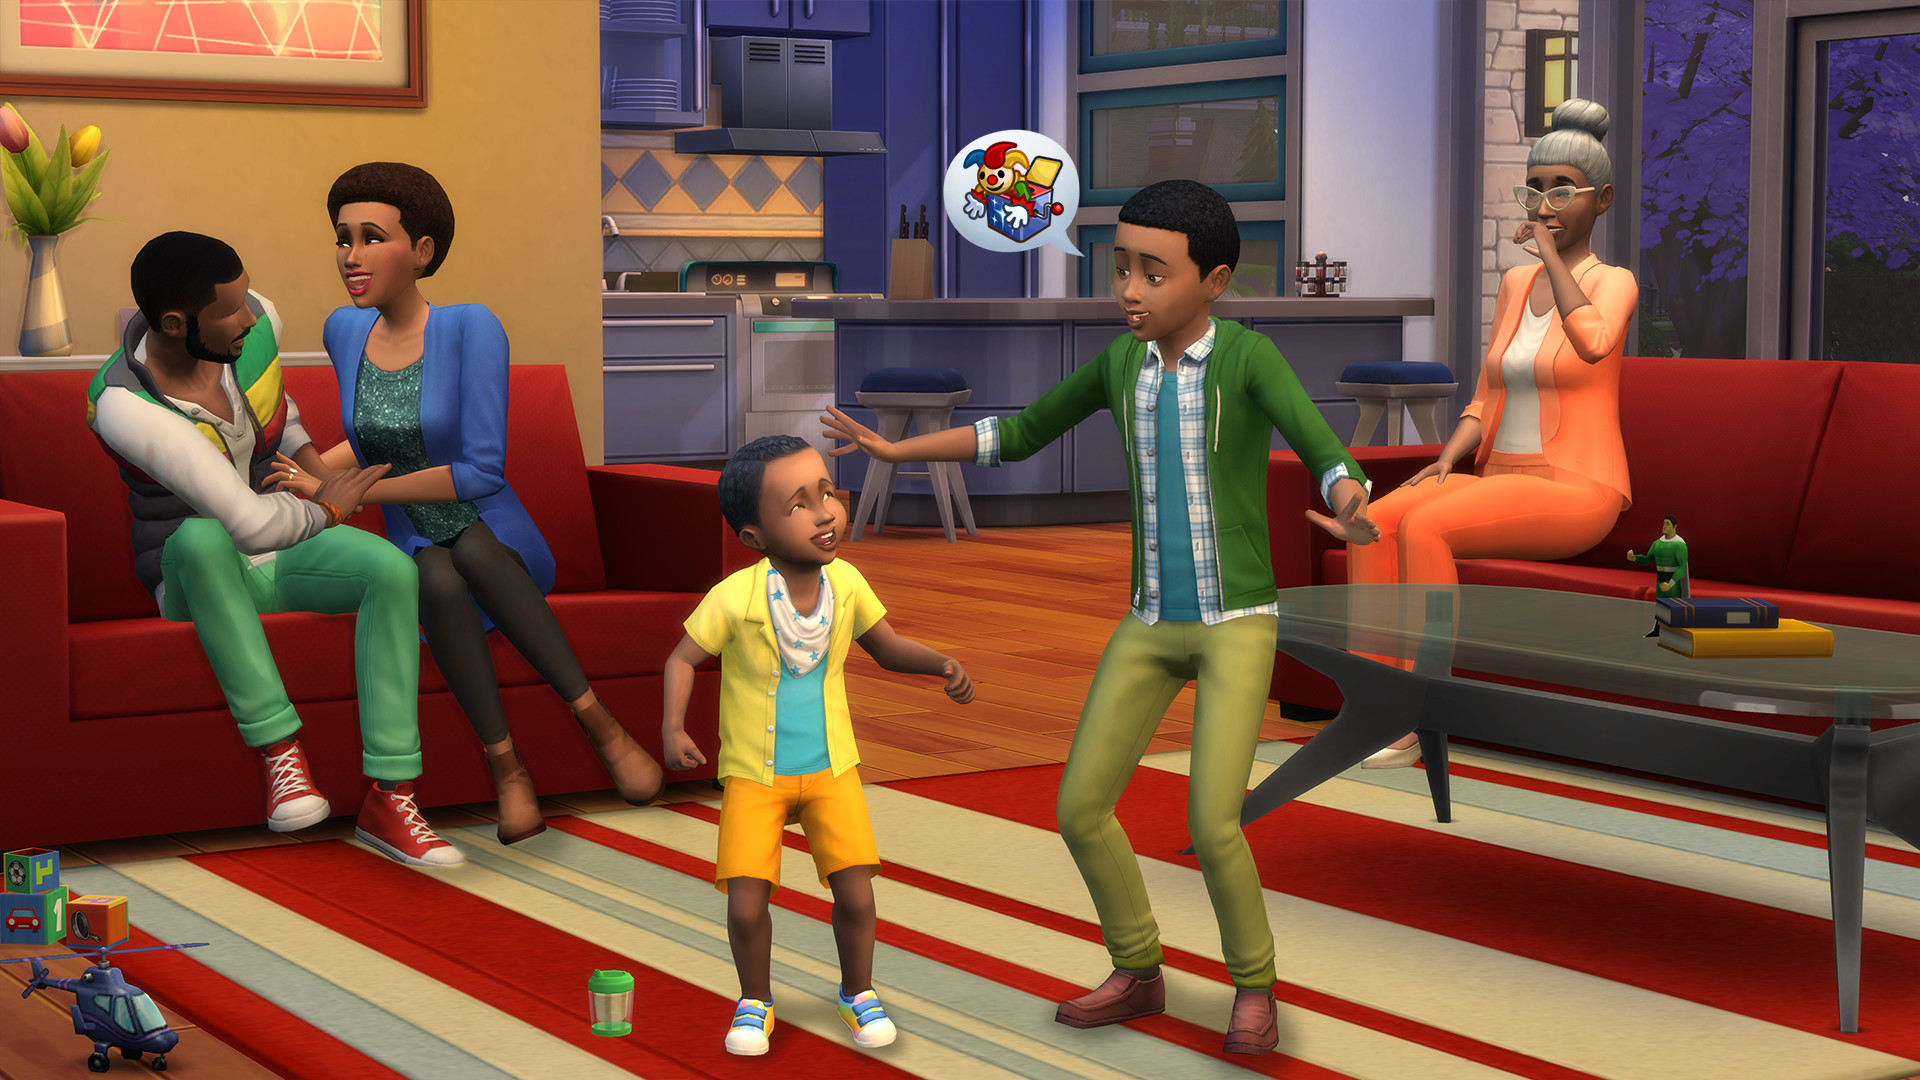 HD desktop wallpaper of a lively scene from The Sims 4, featuring a family interacting in a colorful living room.